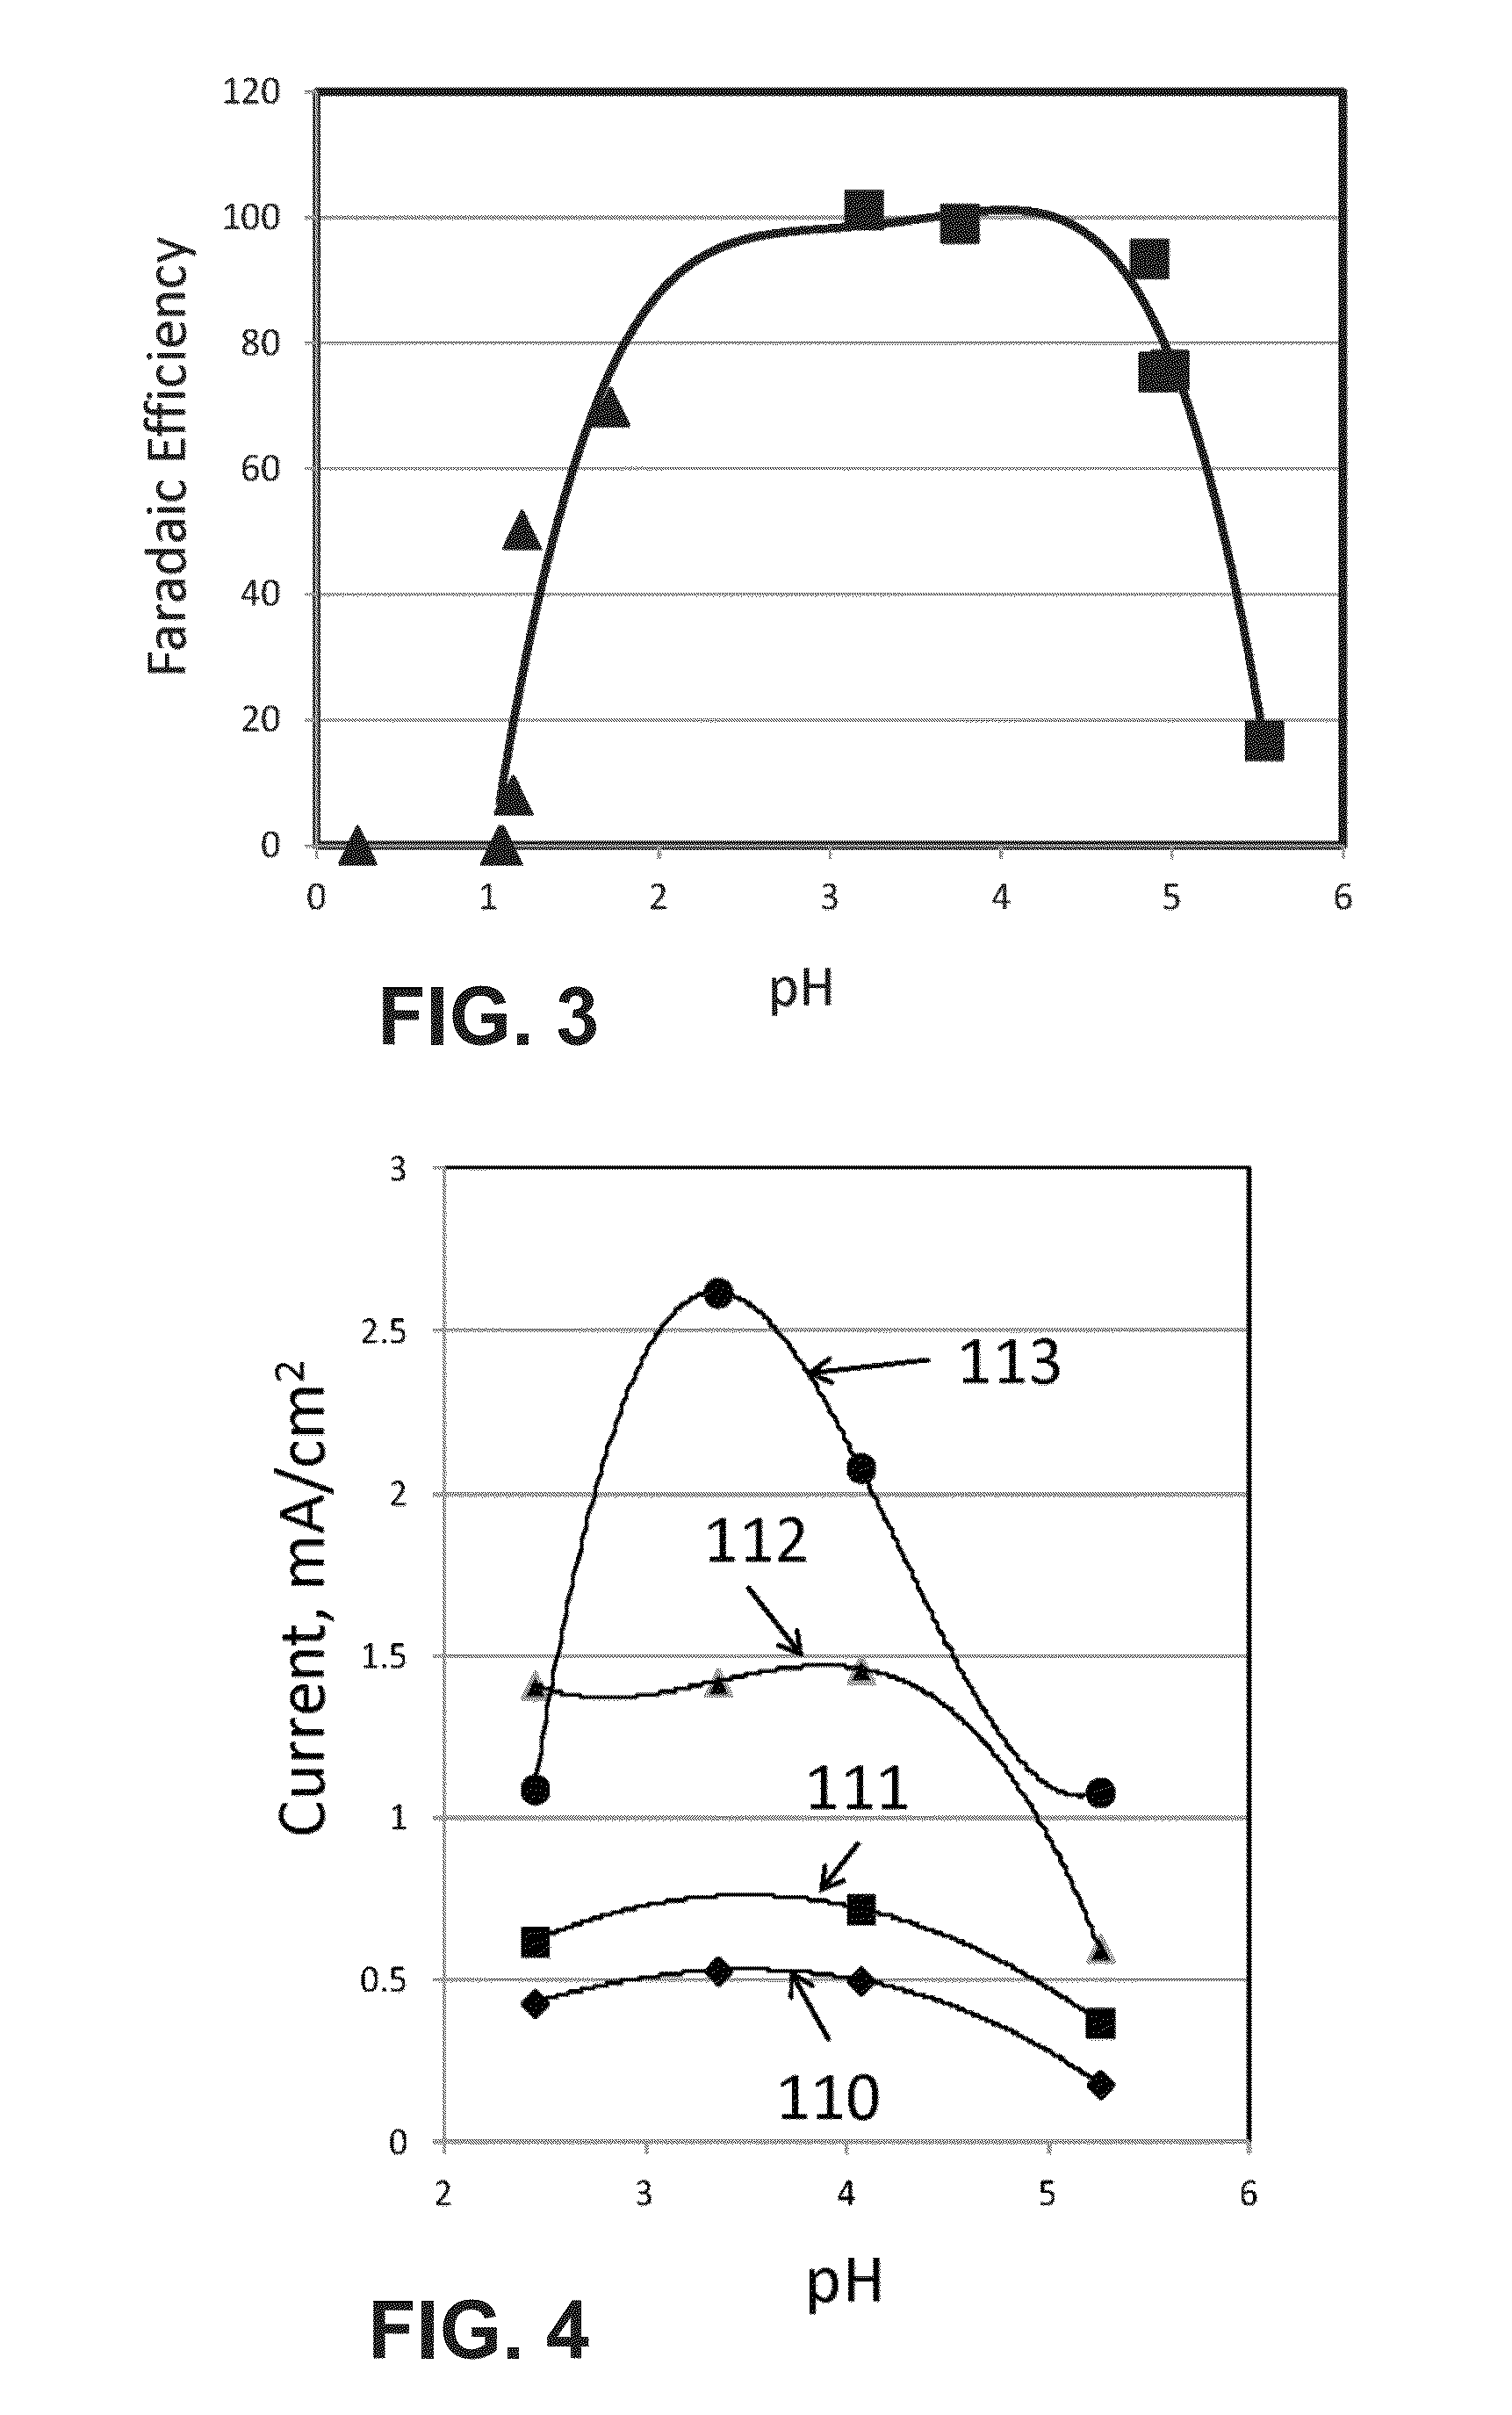 Devices and processes for carbon dioxide conversion into useful fuels and chemicals